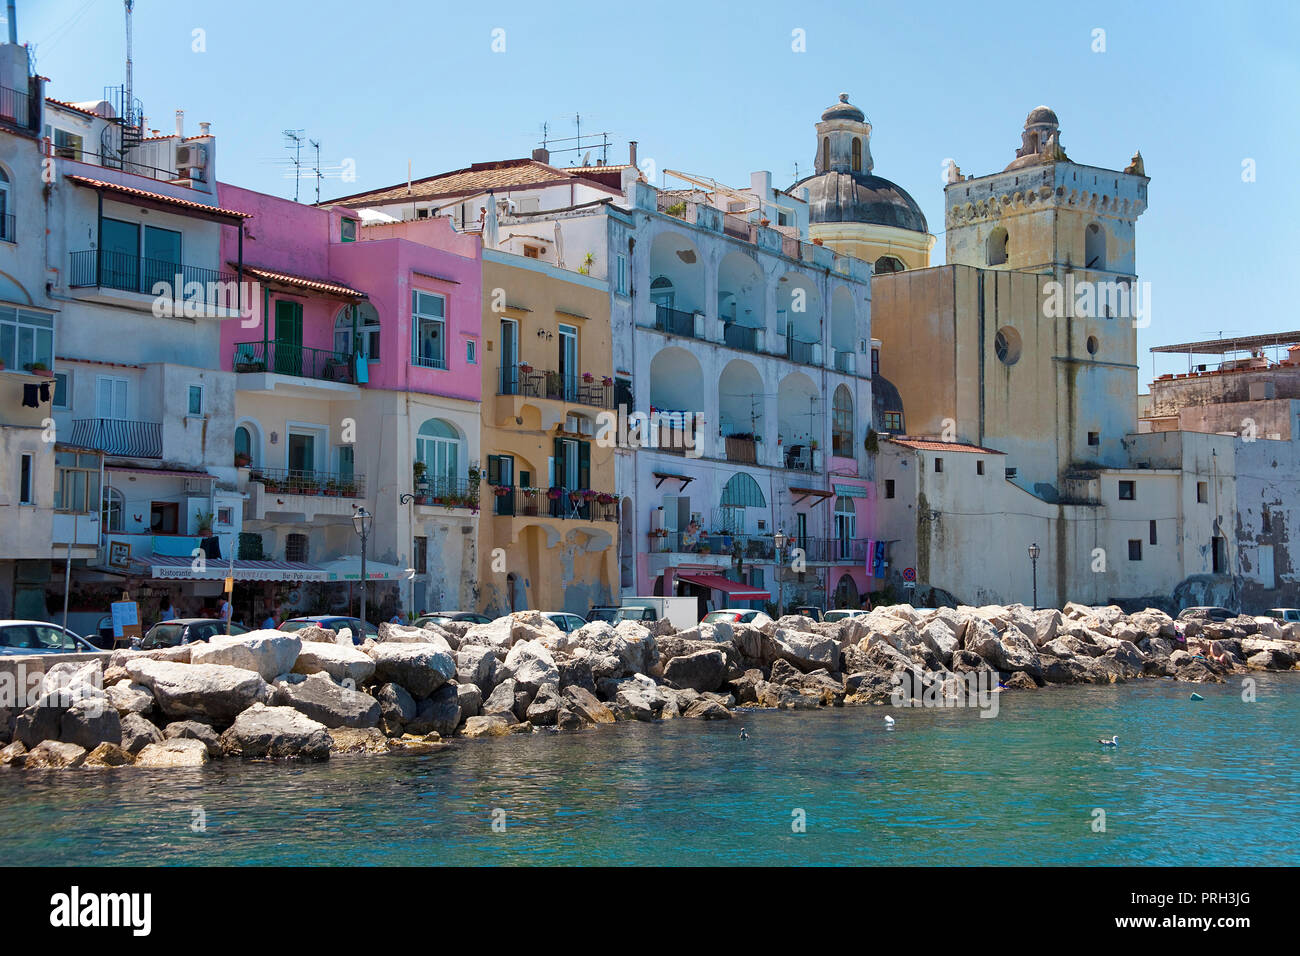 Ischia Ponte High Resolution Stock Photography and Images - Alamy